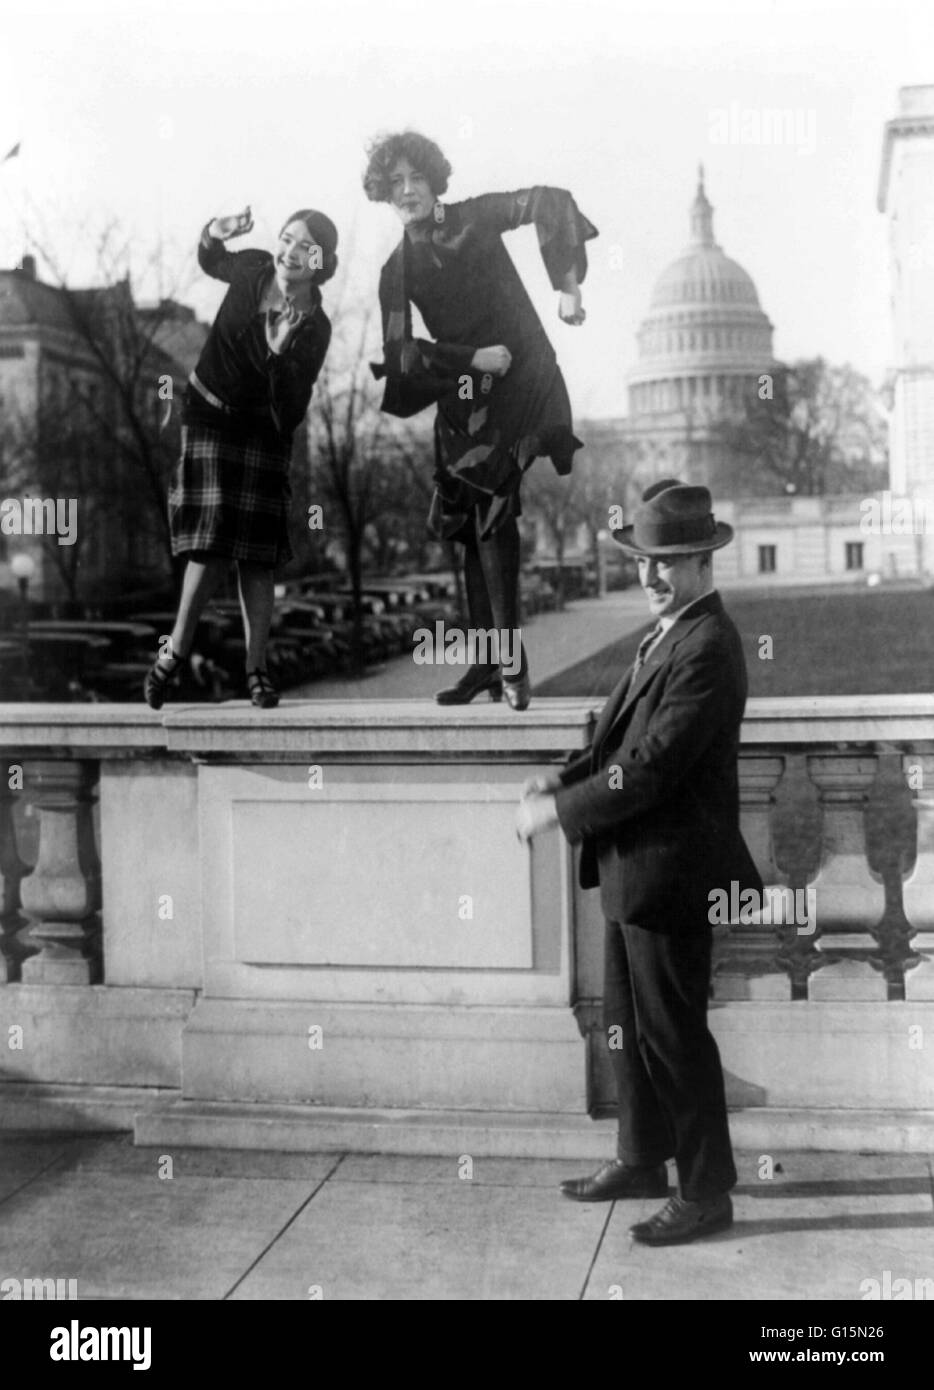 Rep. T.S. McMillan of Charleston, S.C. with flappers, Miss Ruth Bennett and Miss Sylvia Clavins, who are doing the Charleston on railing, with U.S. Capitol in background, 1926. Flappers were a new breed of young Western women in the 1920s who wore short s Stock Photo